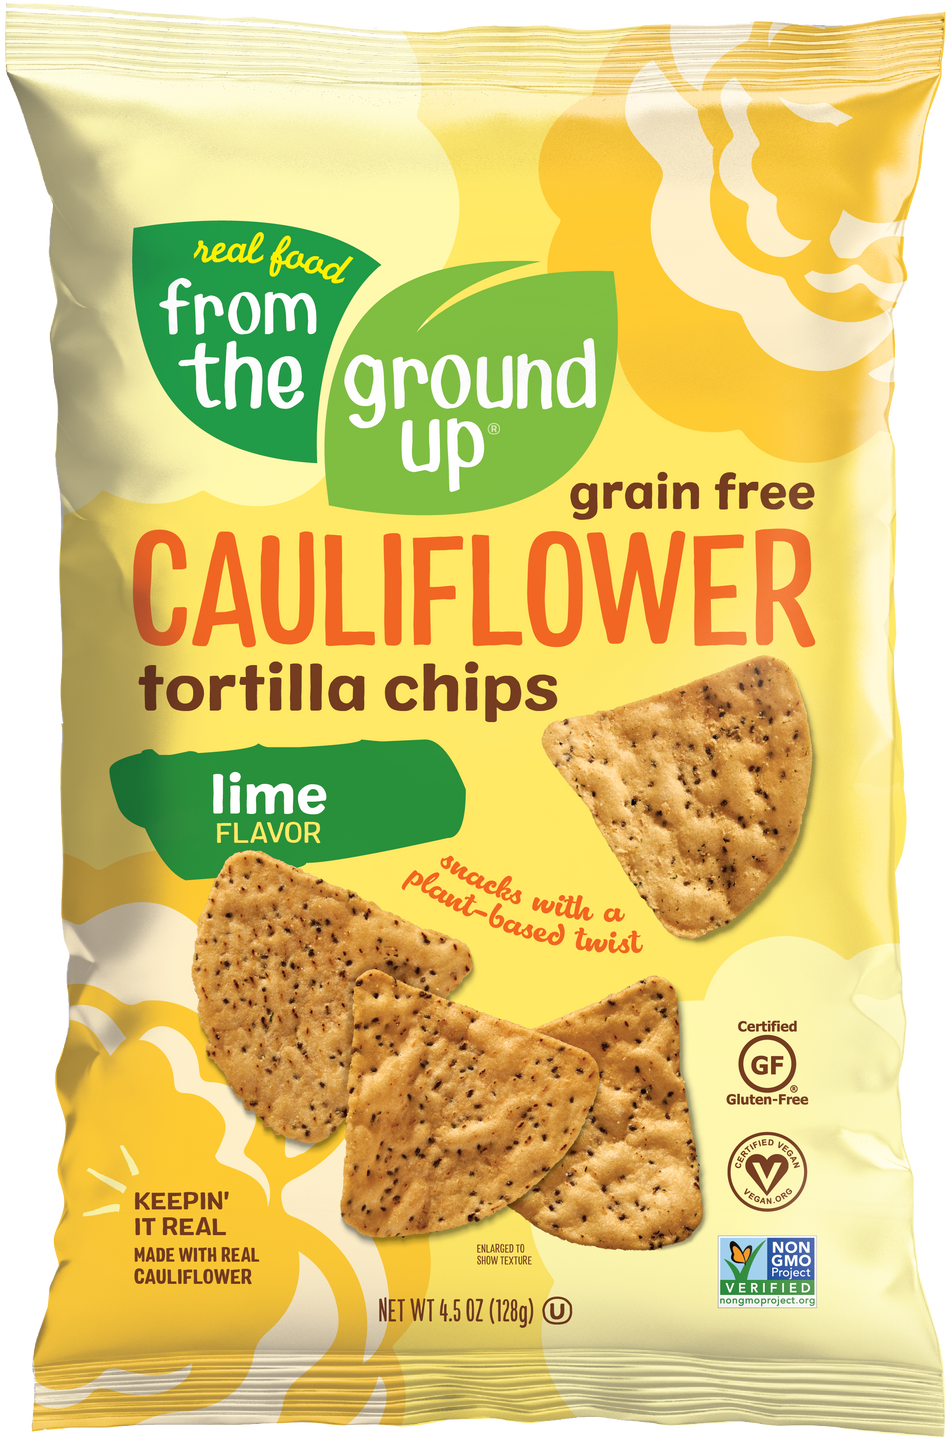 From the Ground Up Lime Cauliflower Tortilla Chips